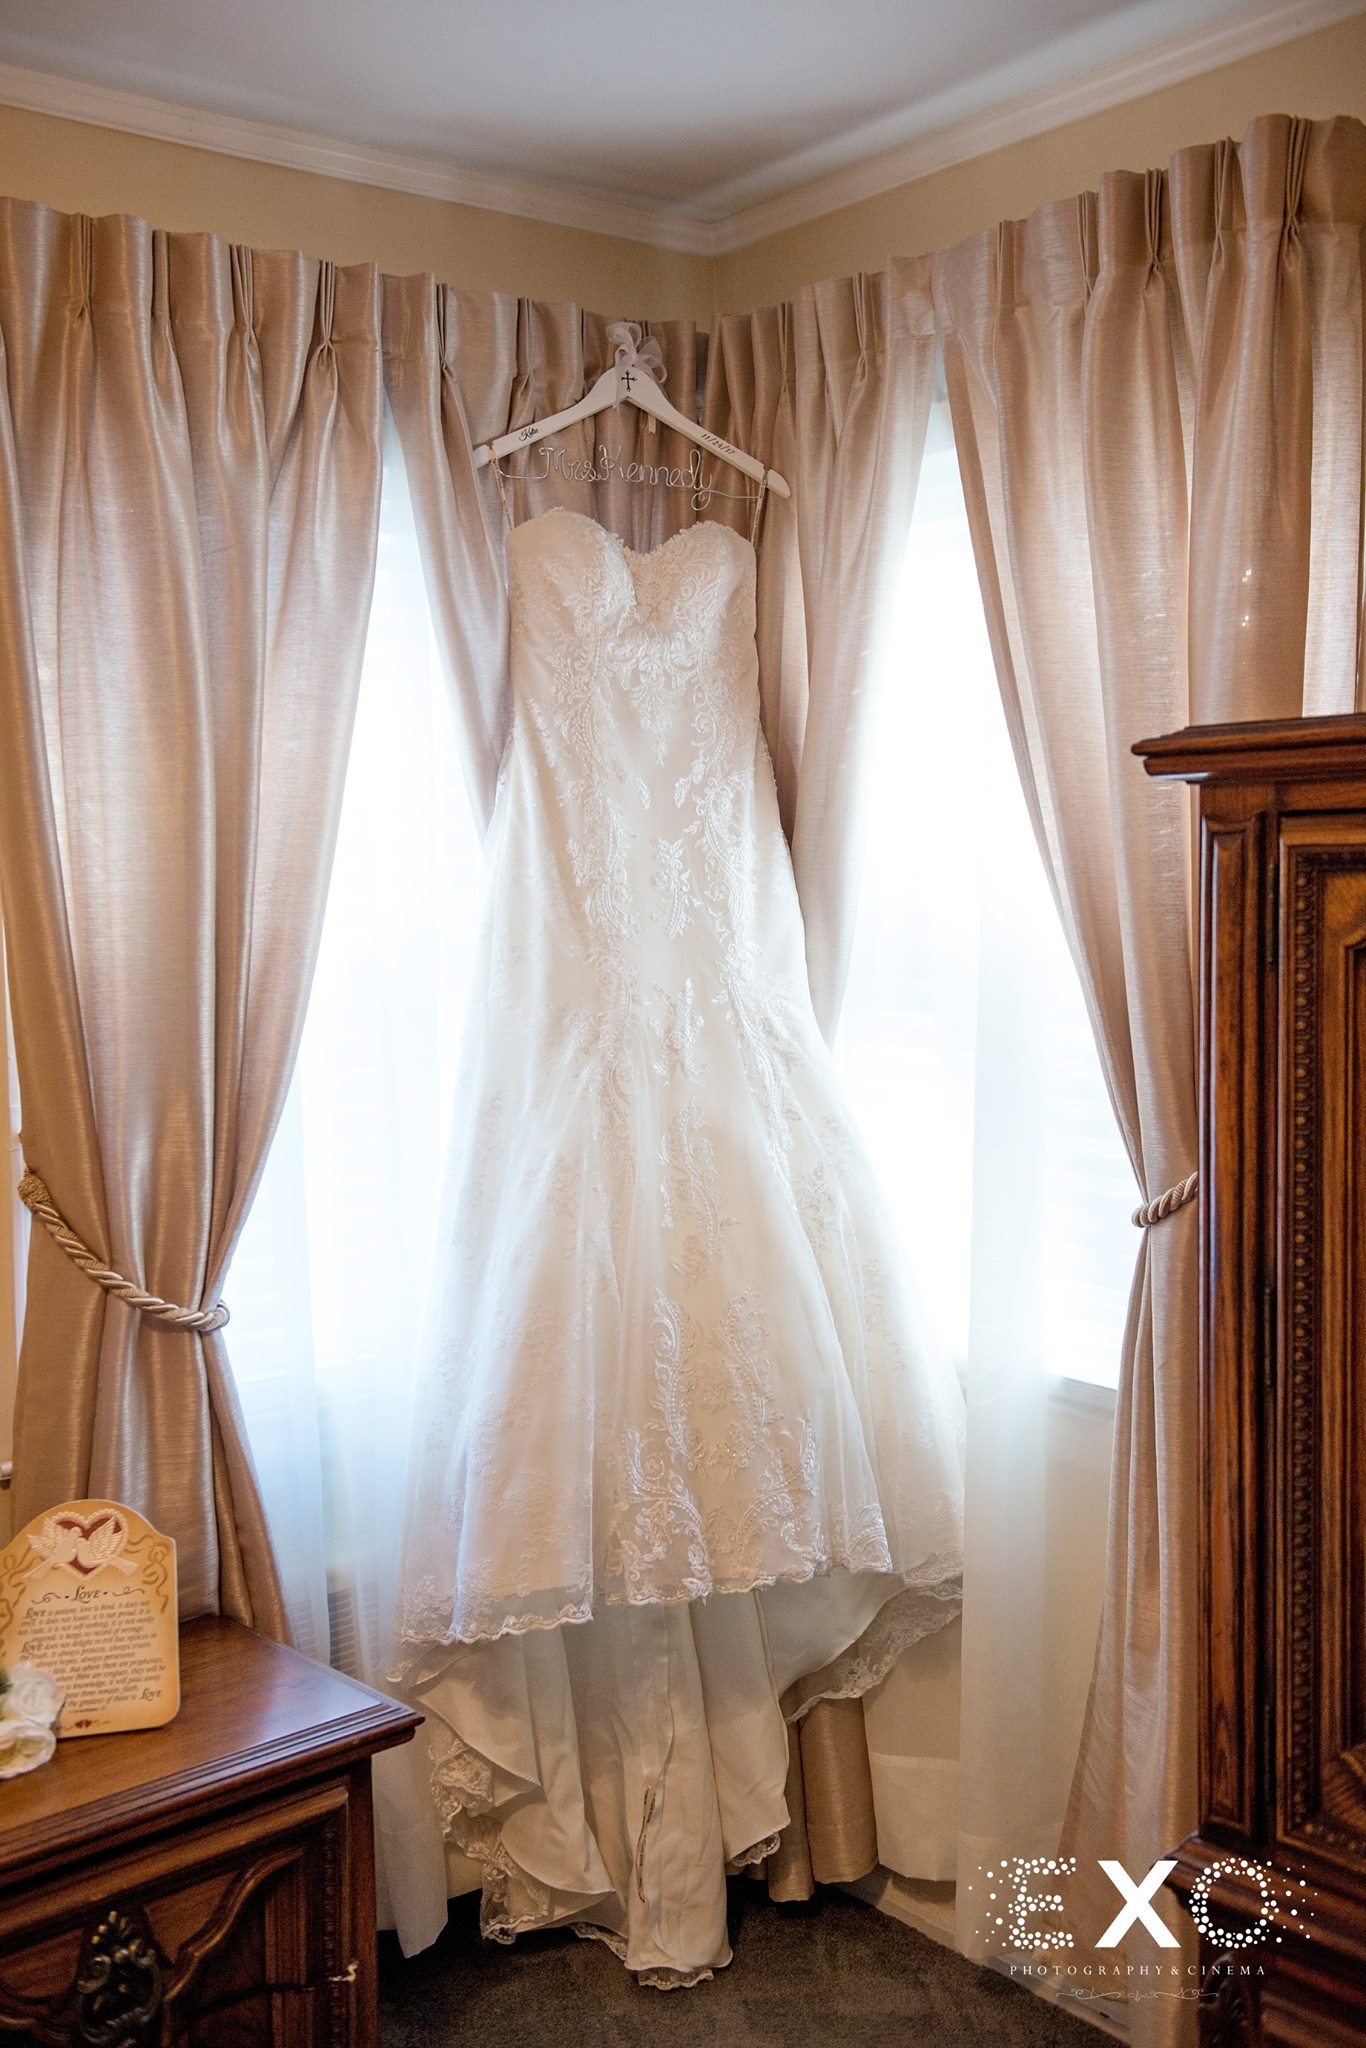 blossom bridal gown designed by maggie sottero hanging in window before long island wedding ceremony